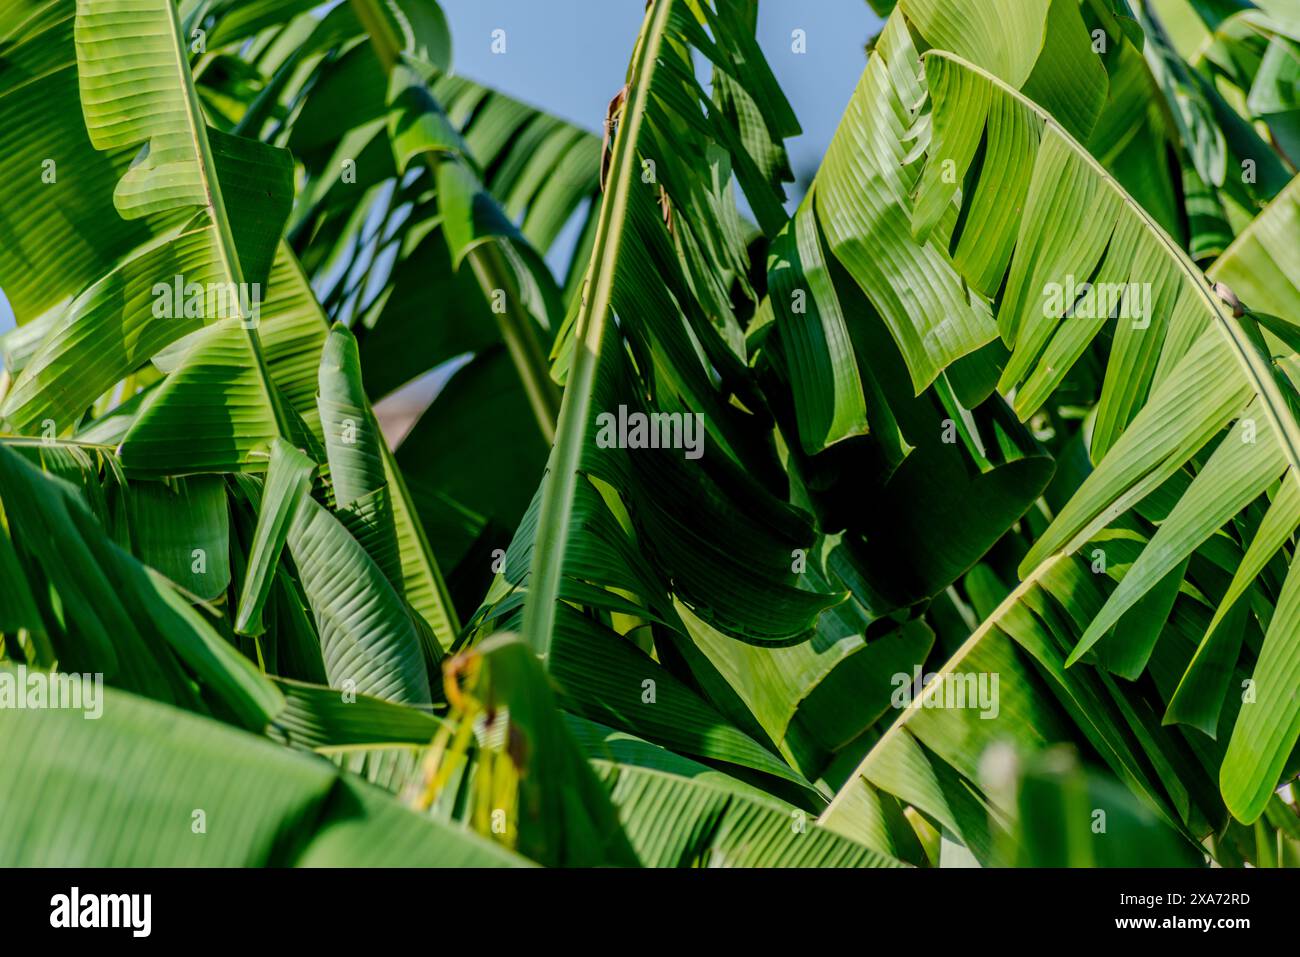 Green bananas on a tree against a blue sky Stock Photo